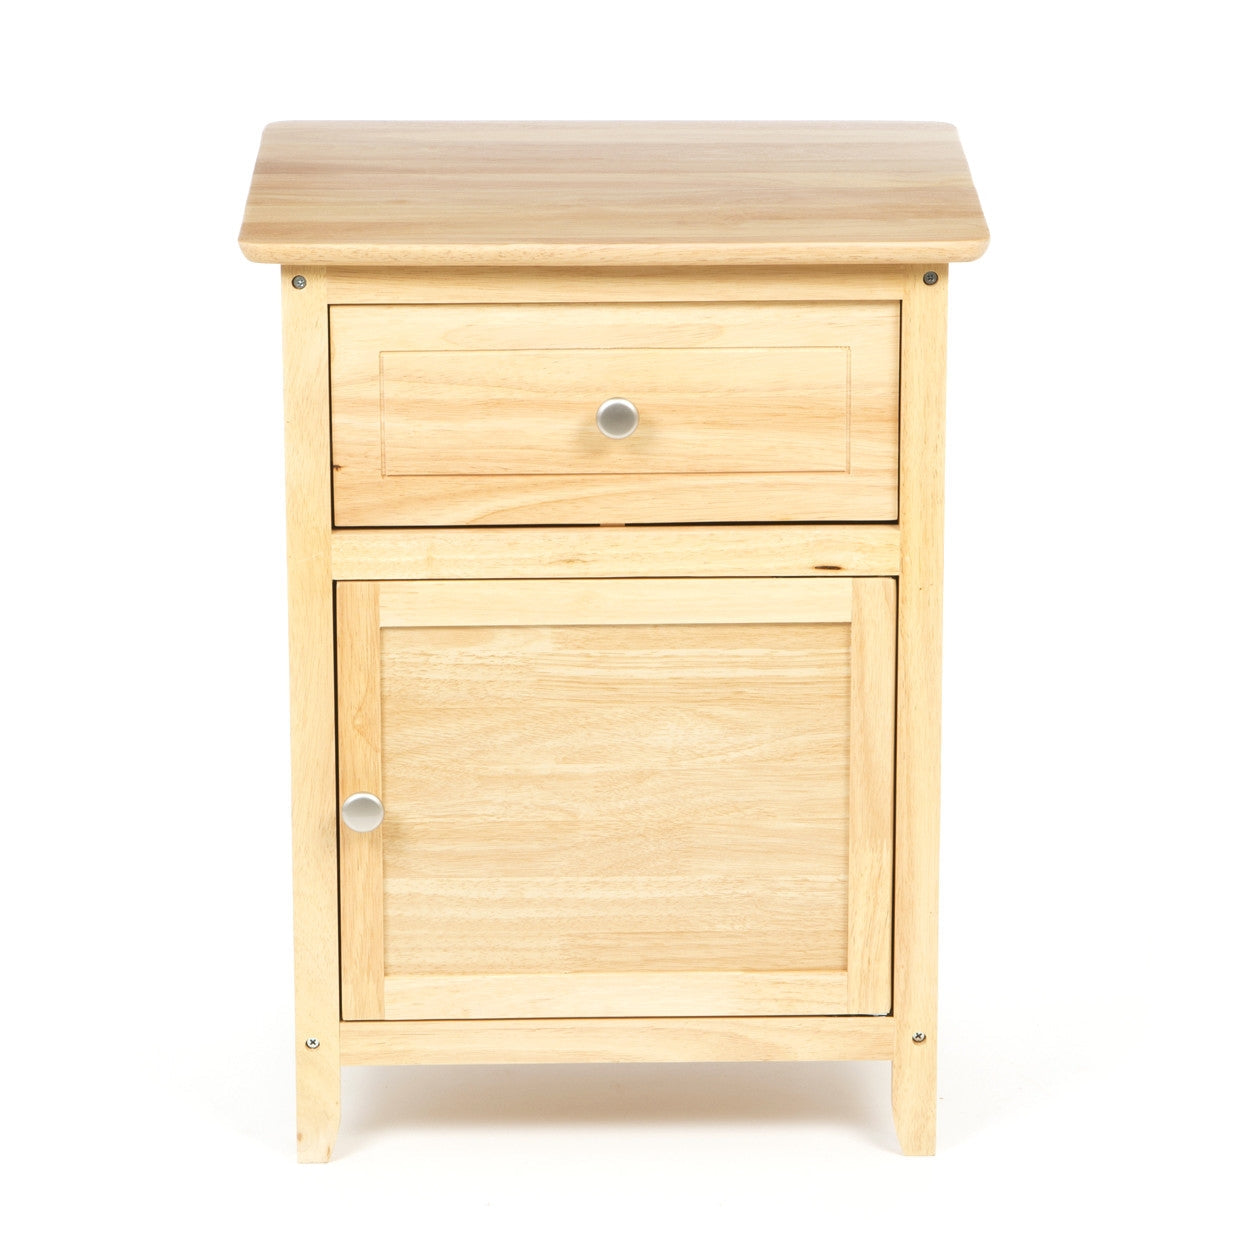 Bedroom > Nightstand And Dressers - Natural Wood Finish 1-Drawer Bedside Table Cabinet Nightstand